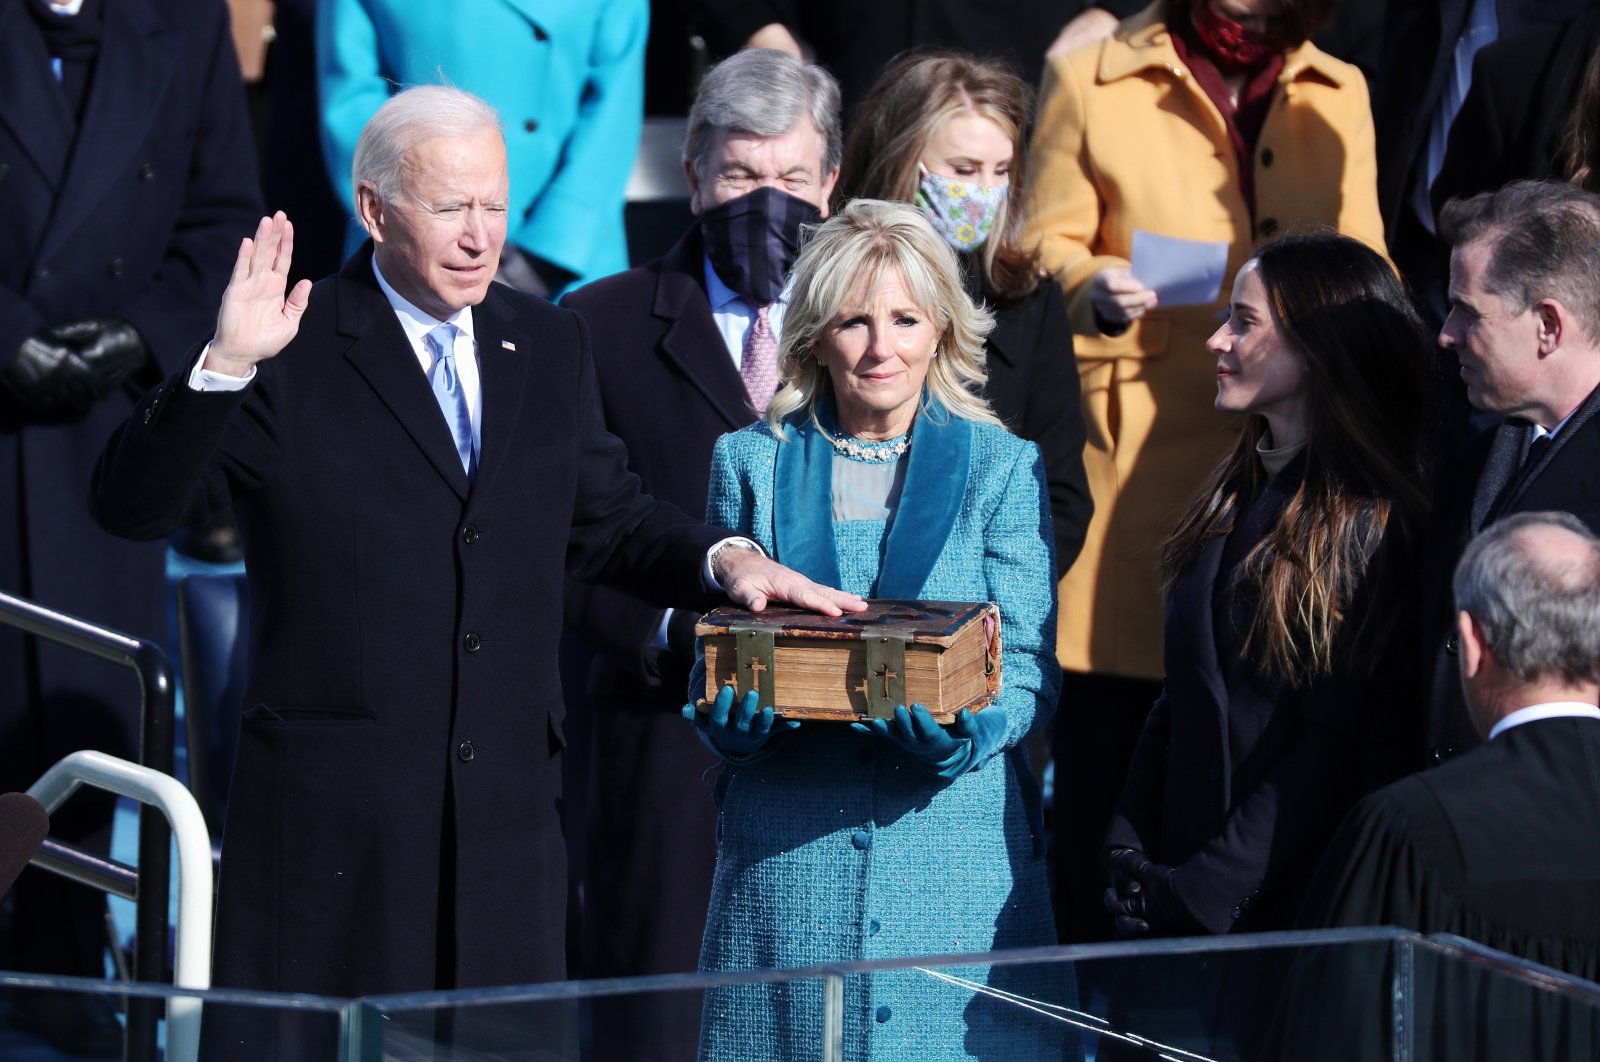 Joe Biden (L) stands with his wife Jill Biden (C) as he is given the oath of office by U.S. Supreme Court Chief Justice John Roberts during the presidential inauguration ceremony on the West Front of the U.S. Capitol in Washington, D.C., U.S., Jan. 20, 2021. (EPA Photo)